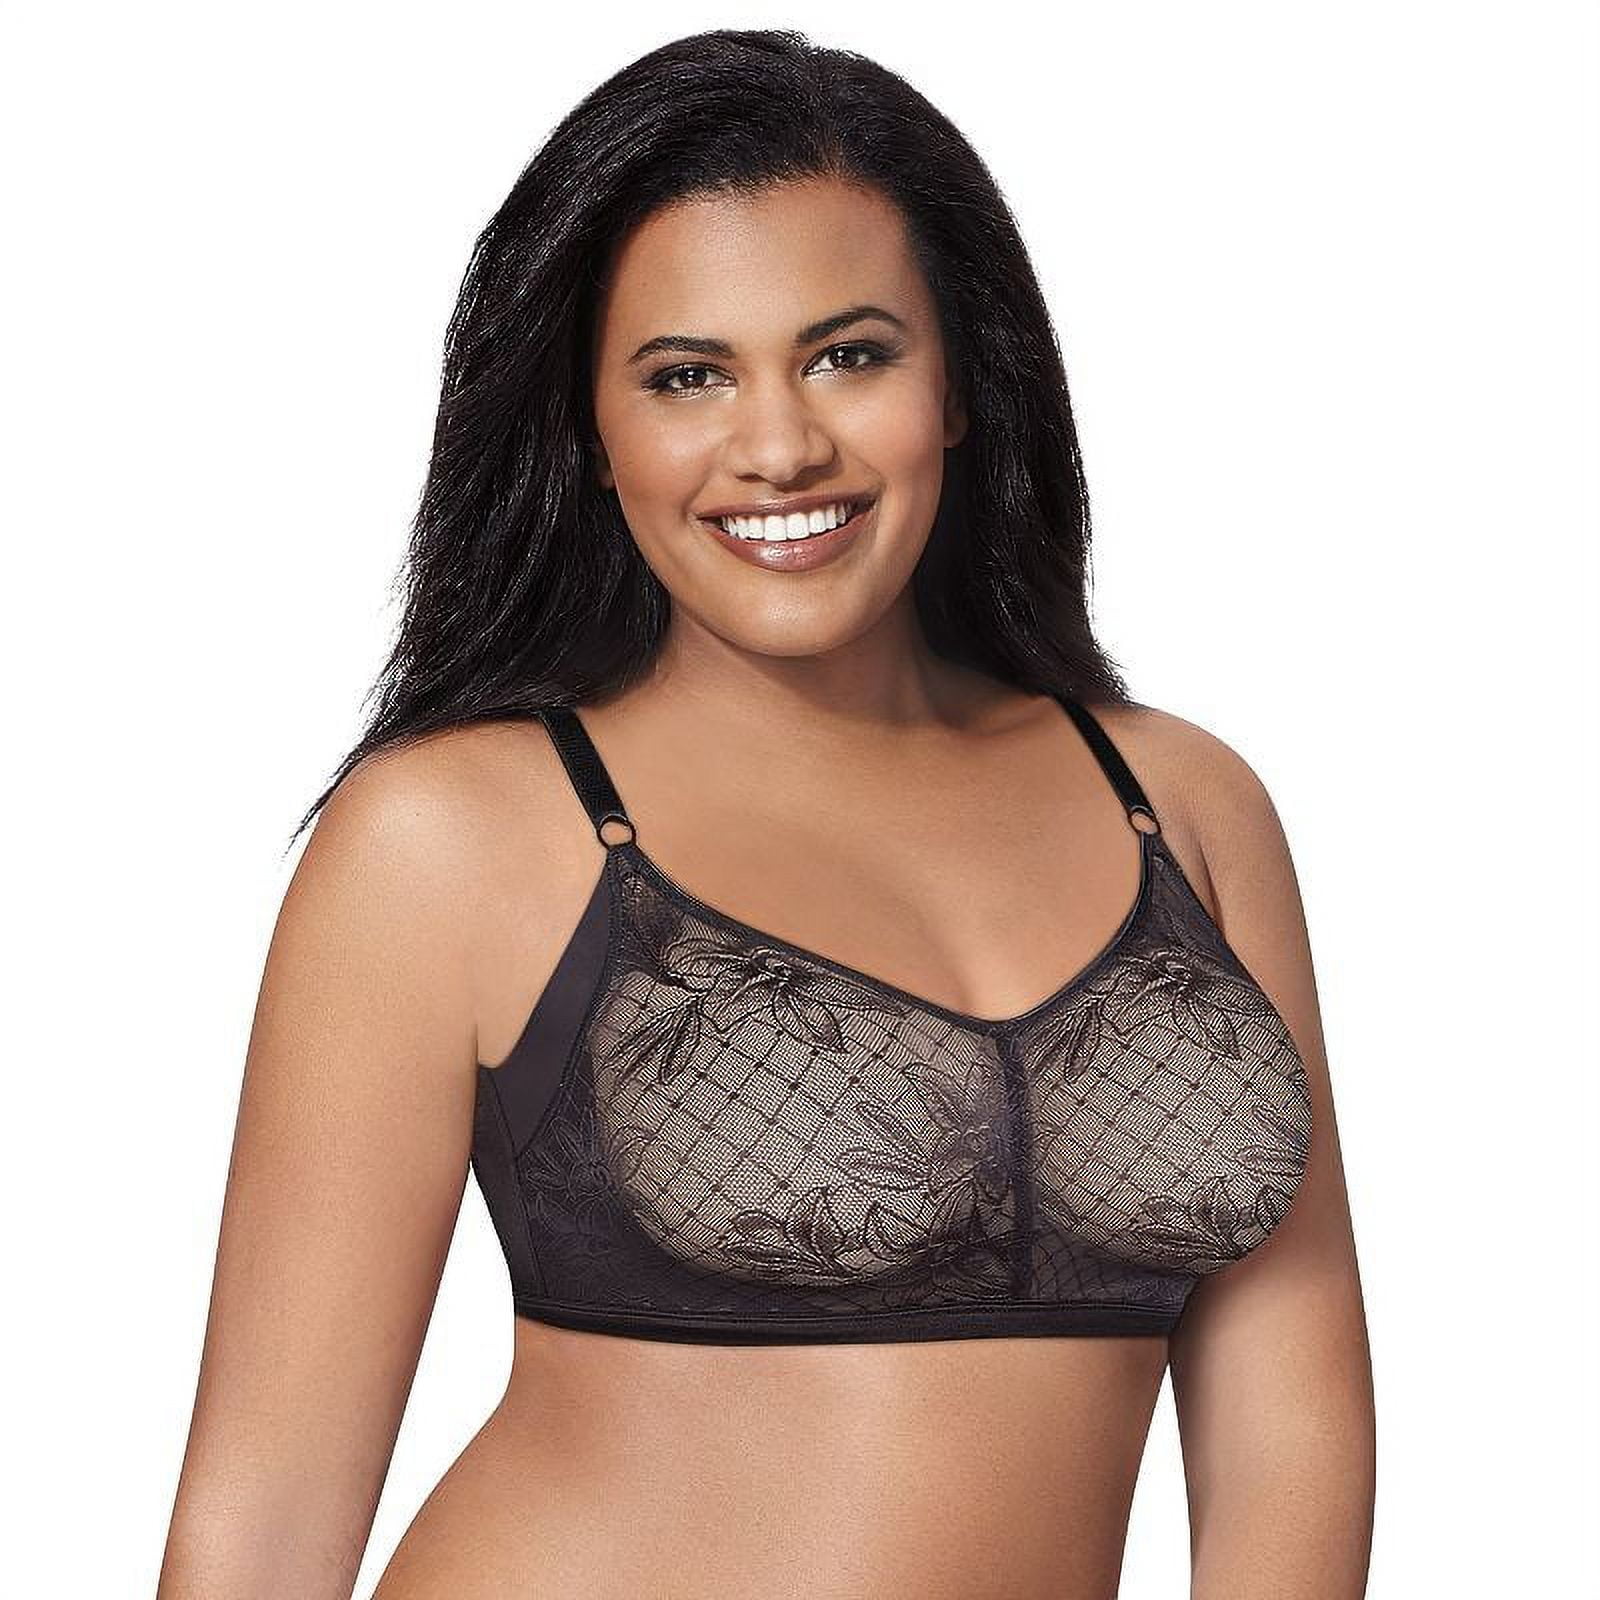 Just My Size Woman's Bras: 2-pack Undercover Slimming Full-Figure